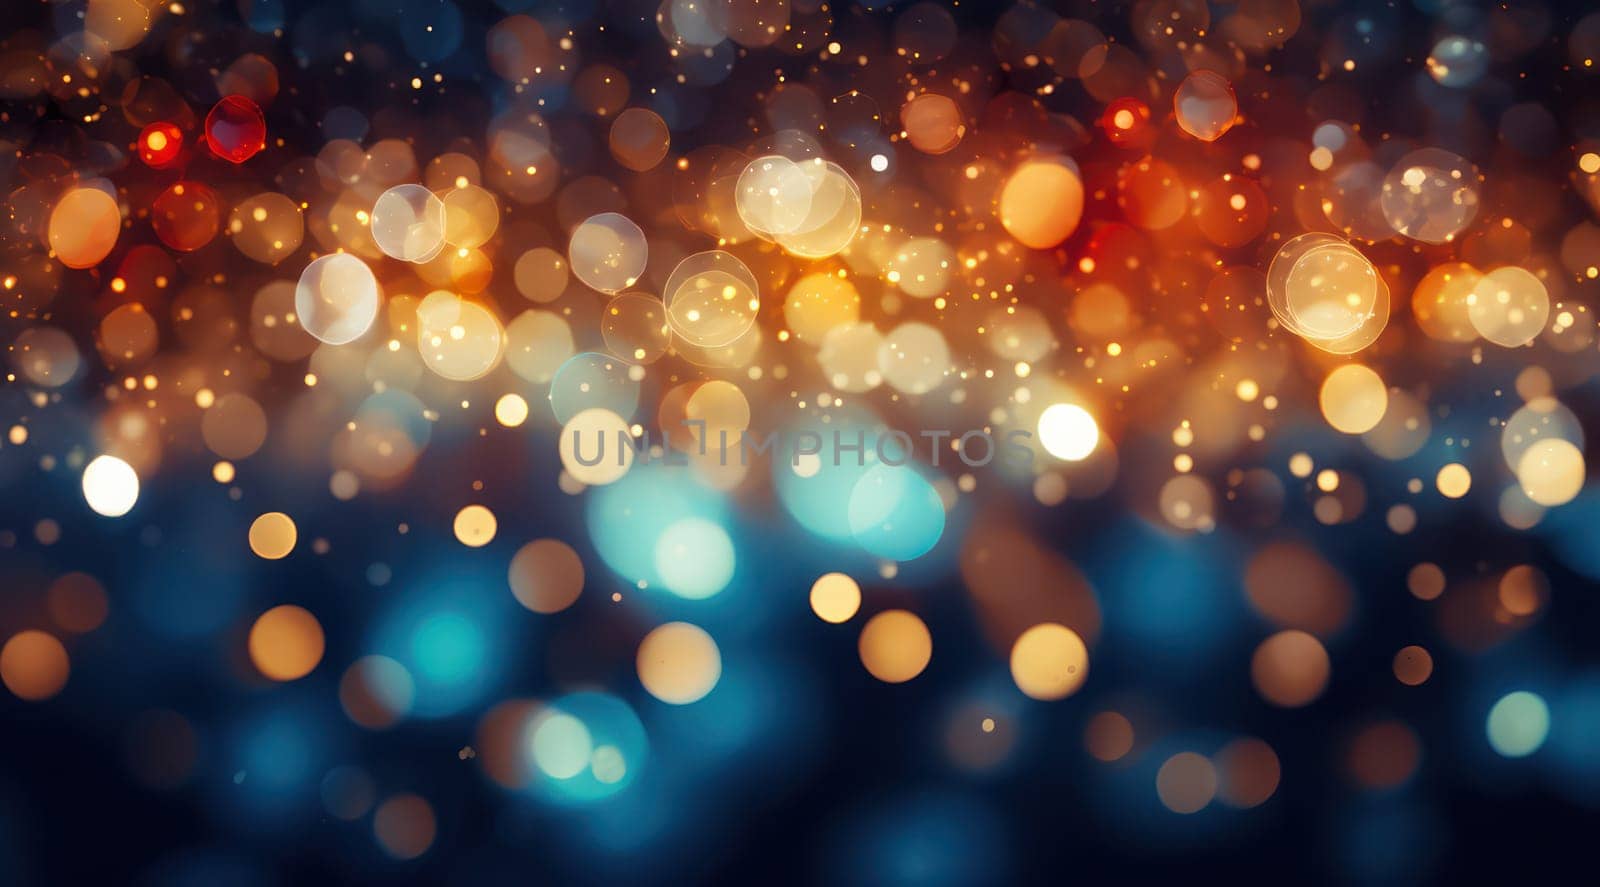 Shimmering Christmas Magic: Glowing Abstract Bokeh Background with Bright, Shiny Space and Festive Defocused Night Design by Vichizh